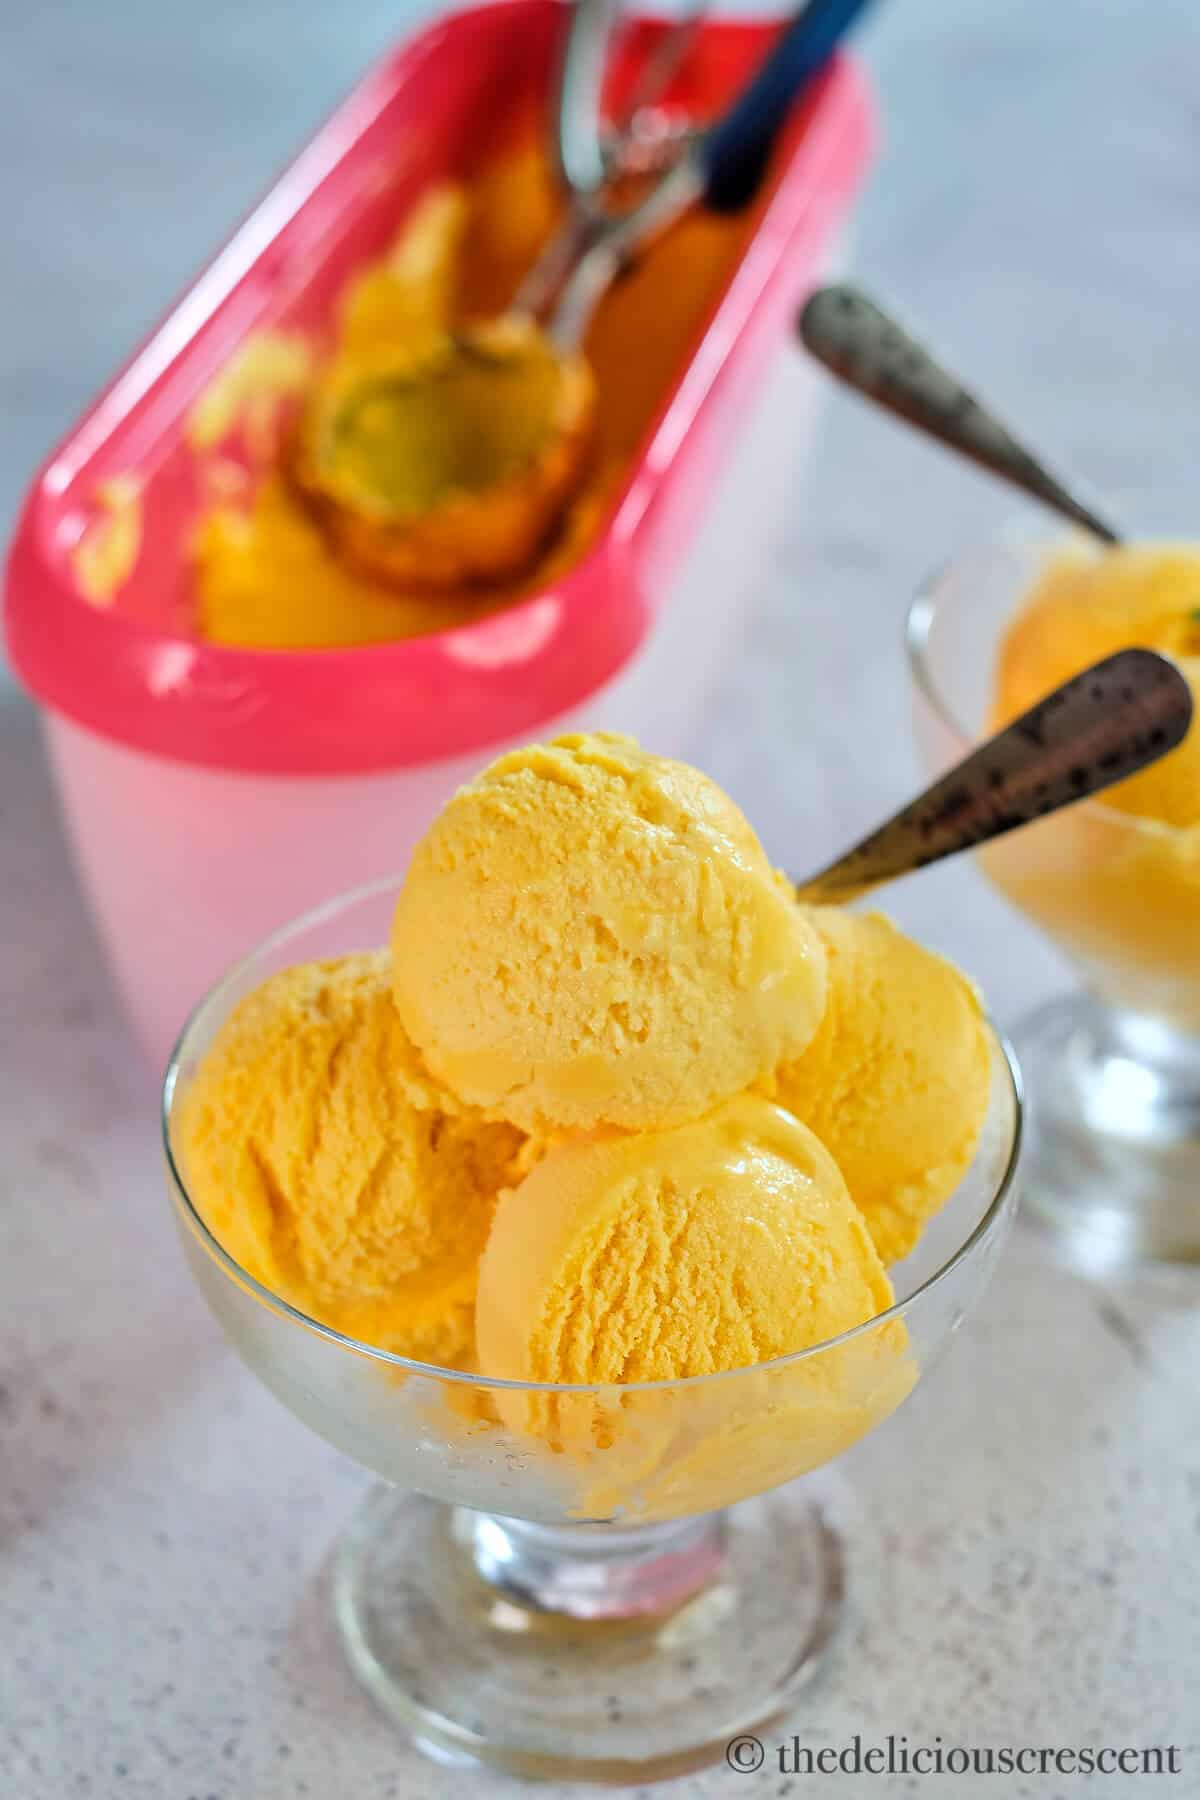 Creamy gelato made with mango and served in a bowl.